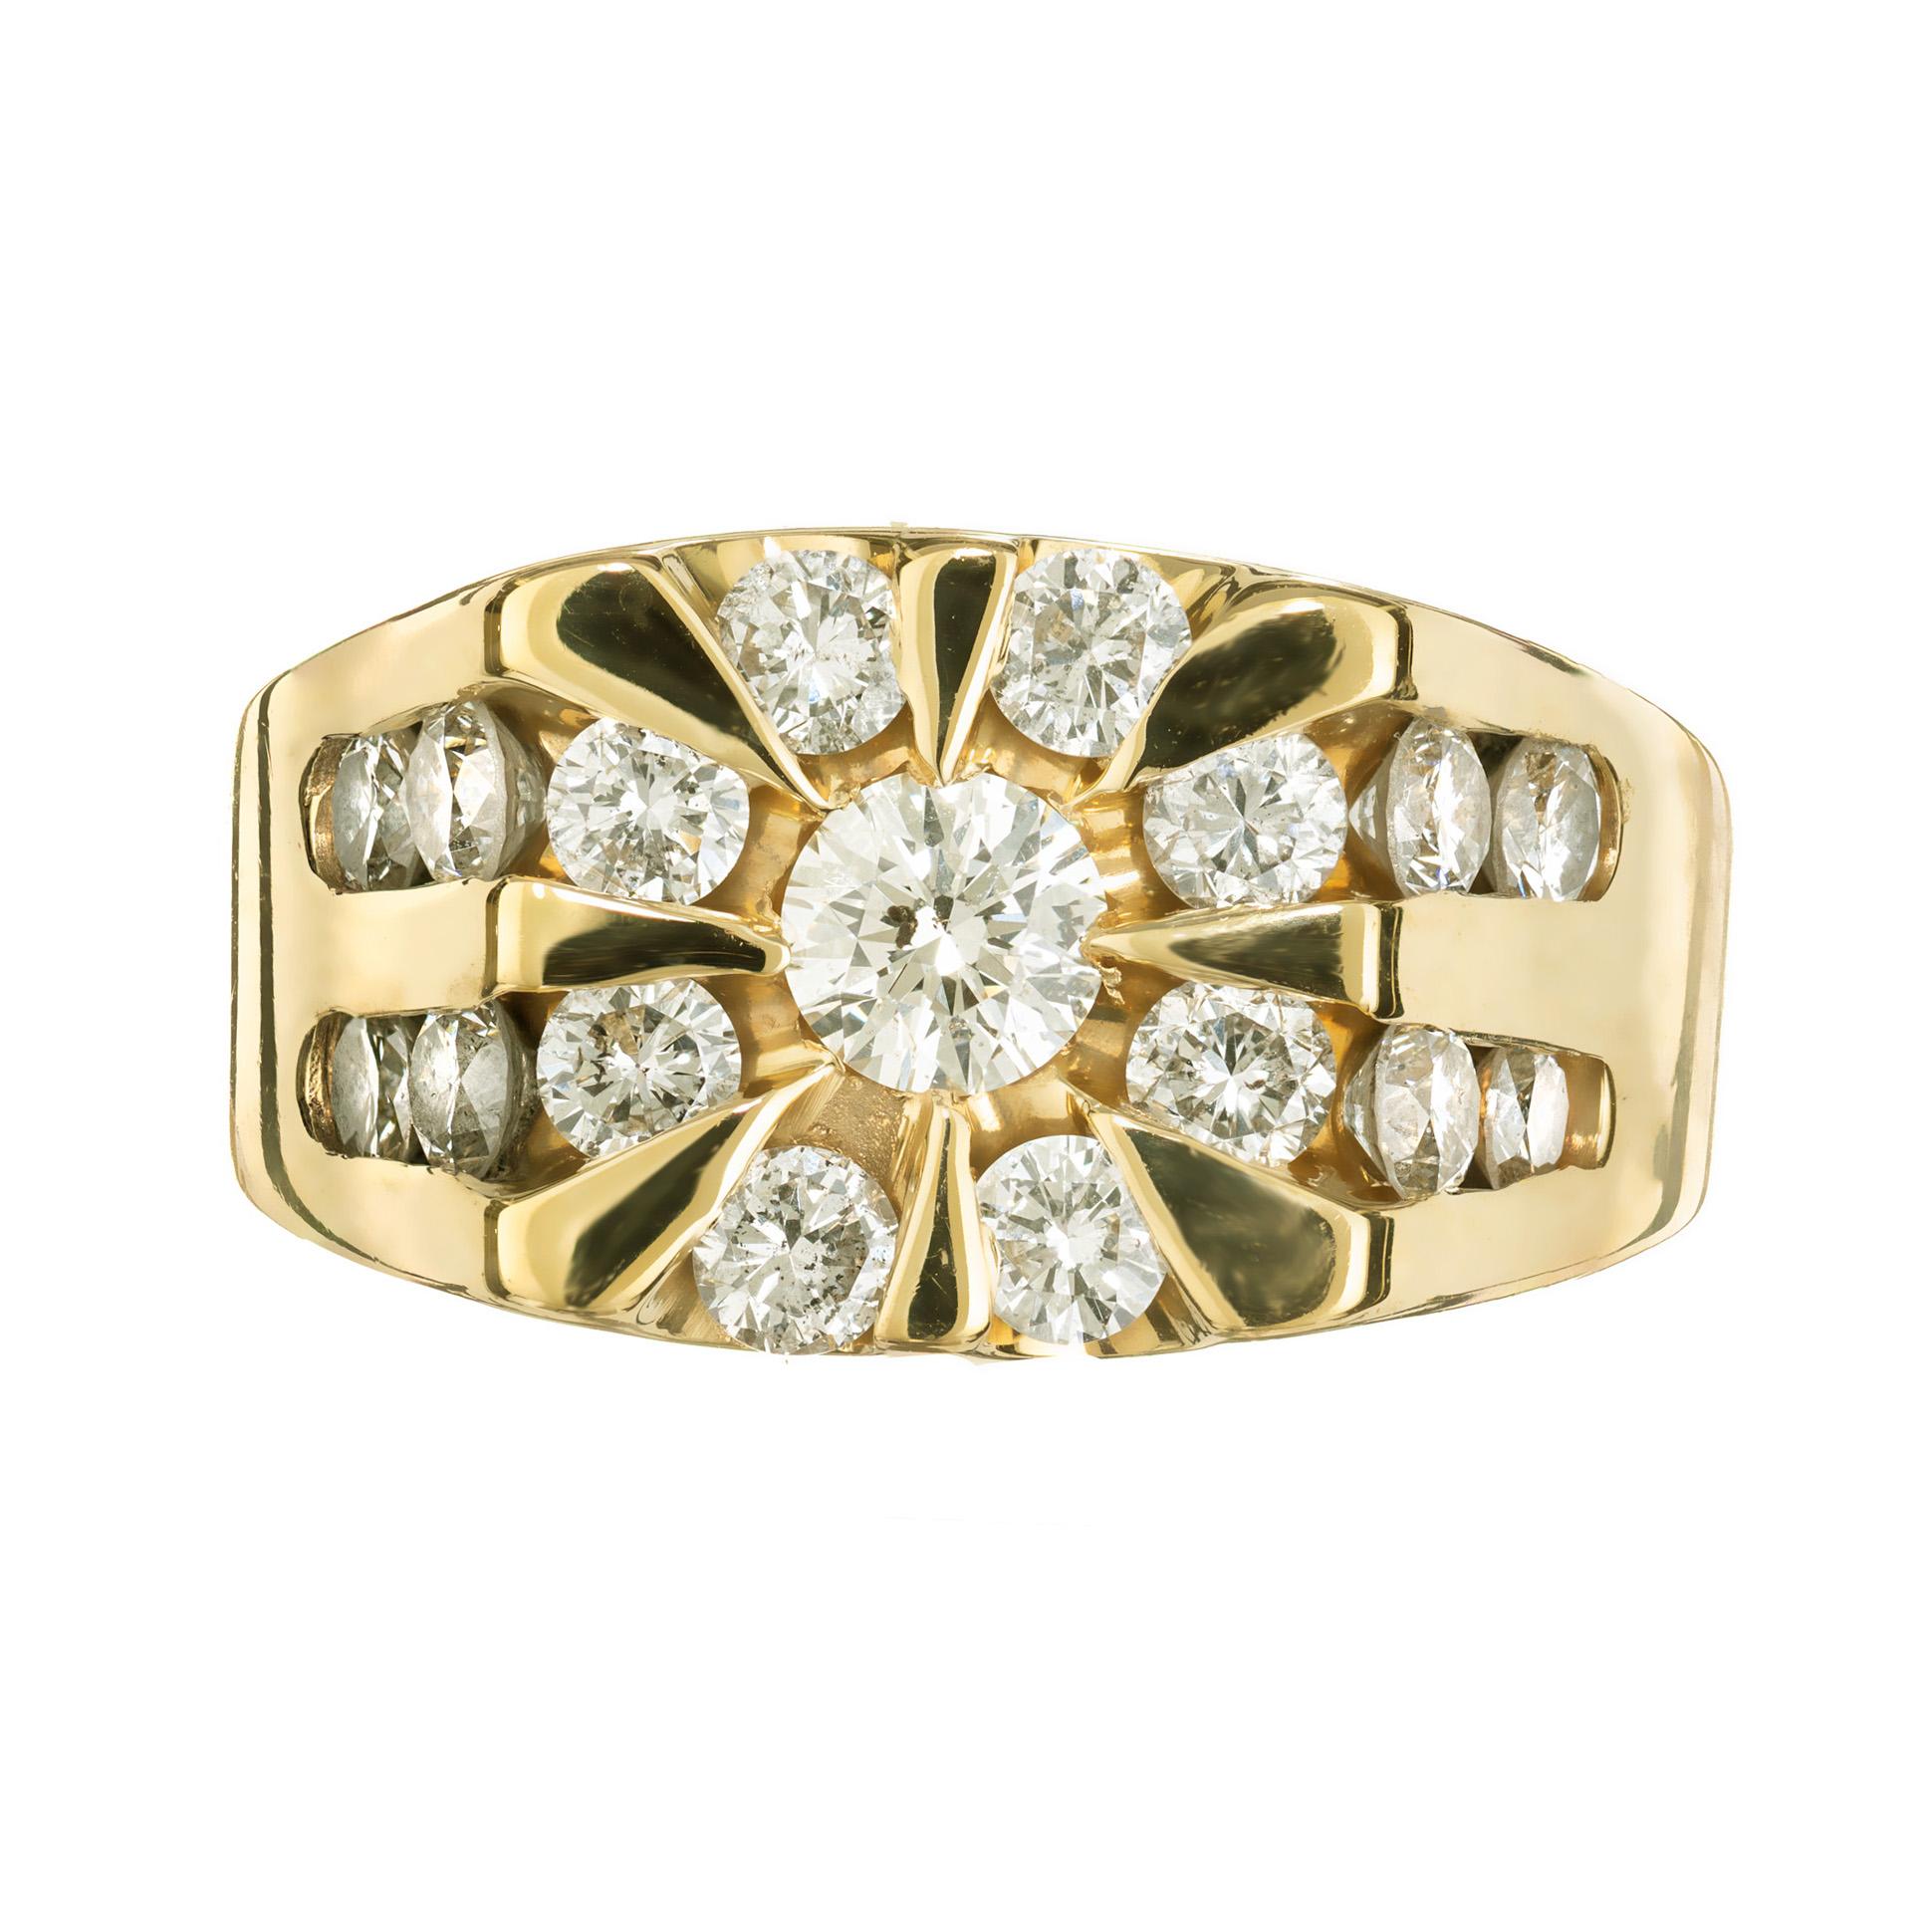 Bold and masculine Magic Glo men's square top diamond ring. 1 round brilliant cut center diamond set in a 14k yellow gold setting with 16 round brilliant cut accent diamonds in the form of a halo and 2 two rows on each side along the shank. 

1